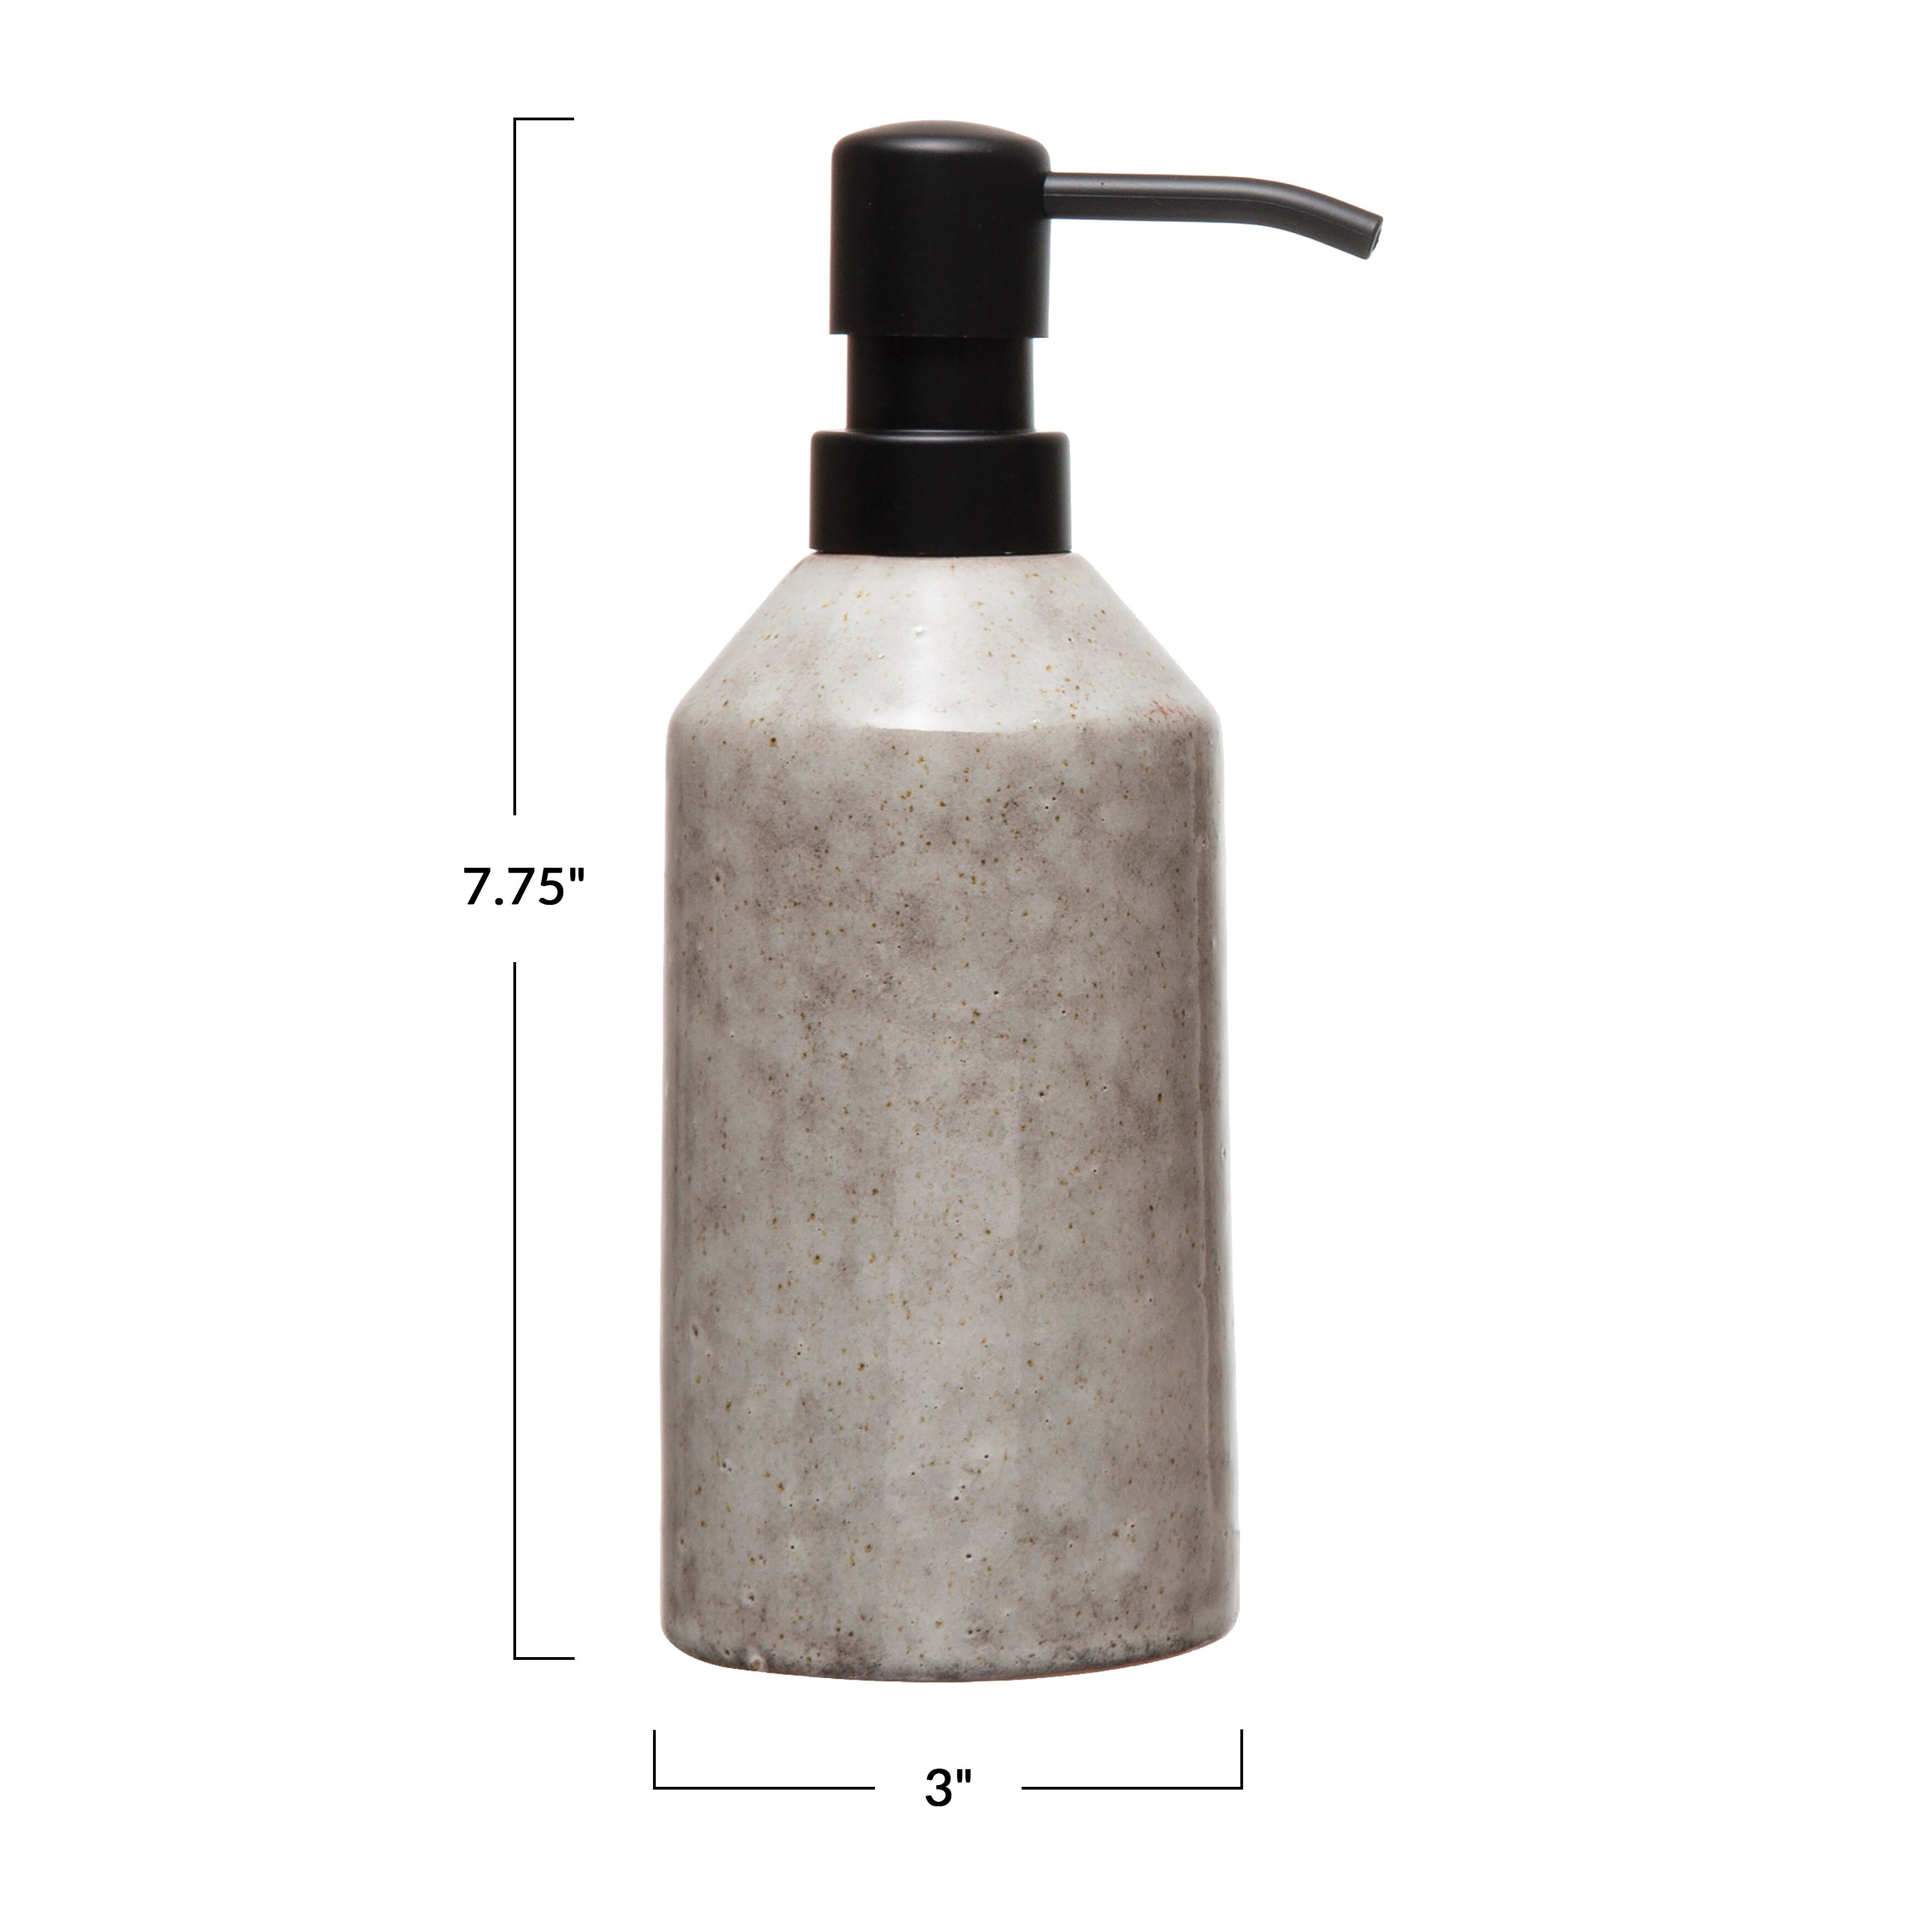 https://ak1.ostkcdn.com/images/products/is/images/direct/b0ad0fa1a789c2d487e1aeead357dfec30bc770e/Neutral-Colored-Reactive-Glaze-Stoneware-Soap-Dispenser-with-Black-Pump.jpg